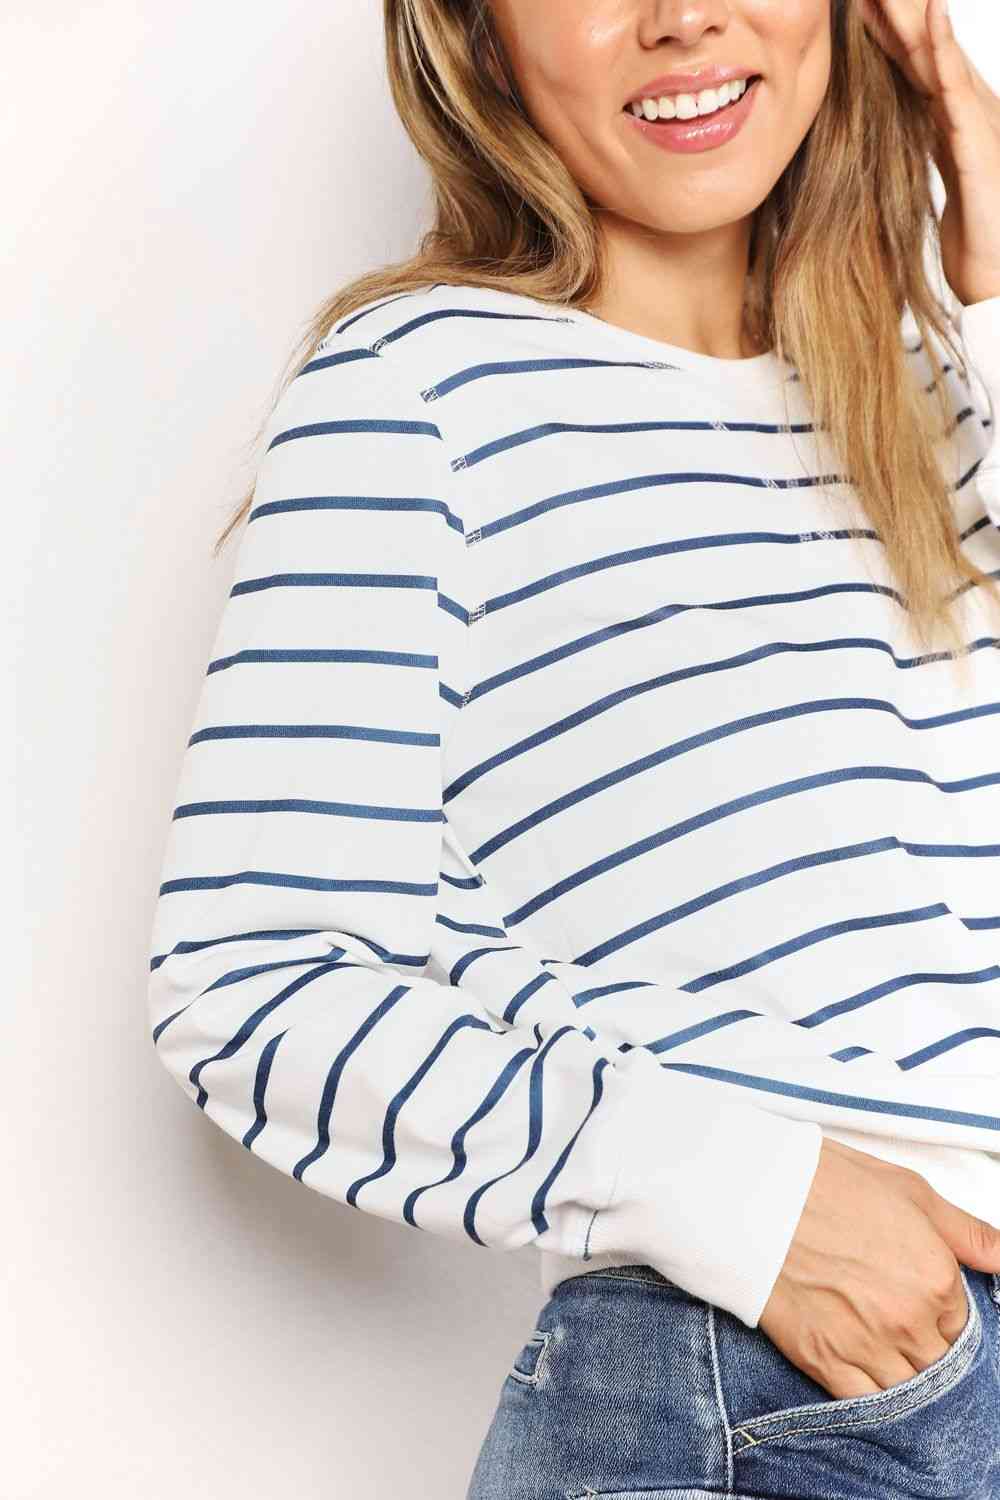 Striped Long Sleeve Round Neck Top - Kawaii Stop - Chic Style, Classic Look, Comfortable Fit, Double Take, Long Sleeve Top, Machine Washable, Opaque Fabric, Round Neck Top, Ship from USA, Striped Pattern, Stylish Wardrobe, Timeless Fashion, Versatile Top, Wardrobe Essential